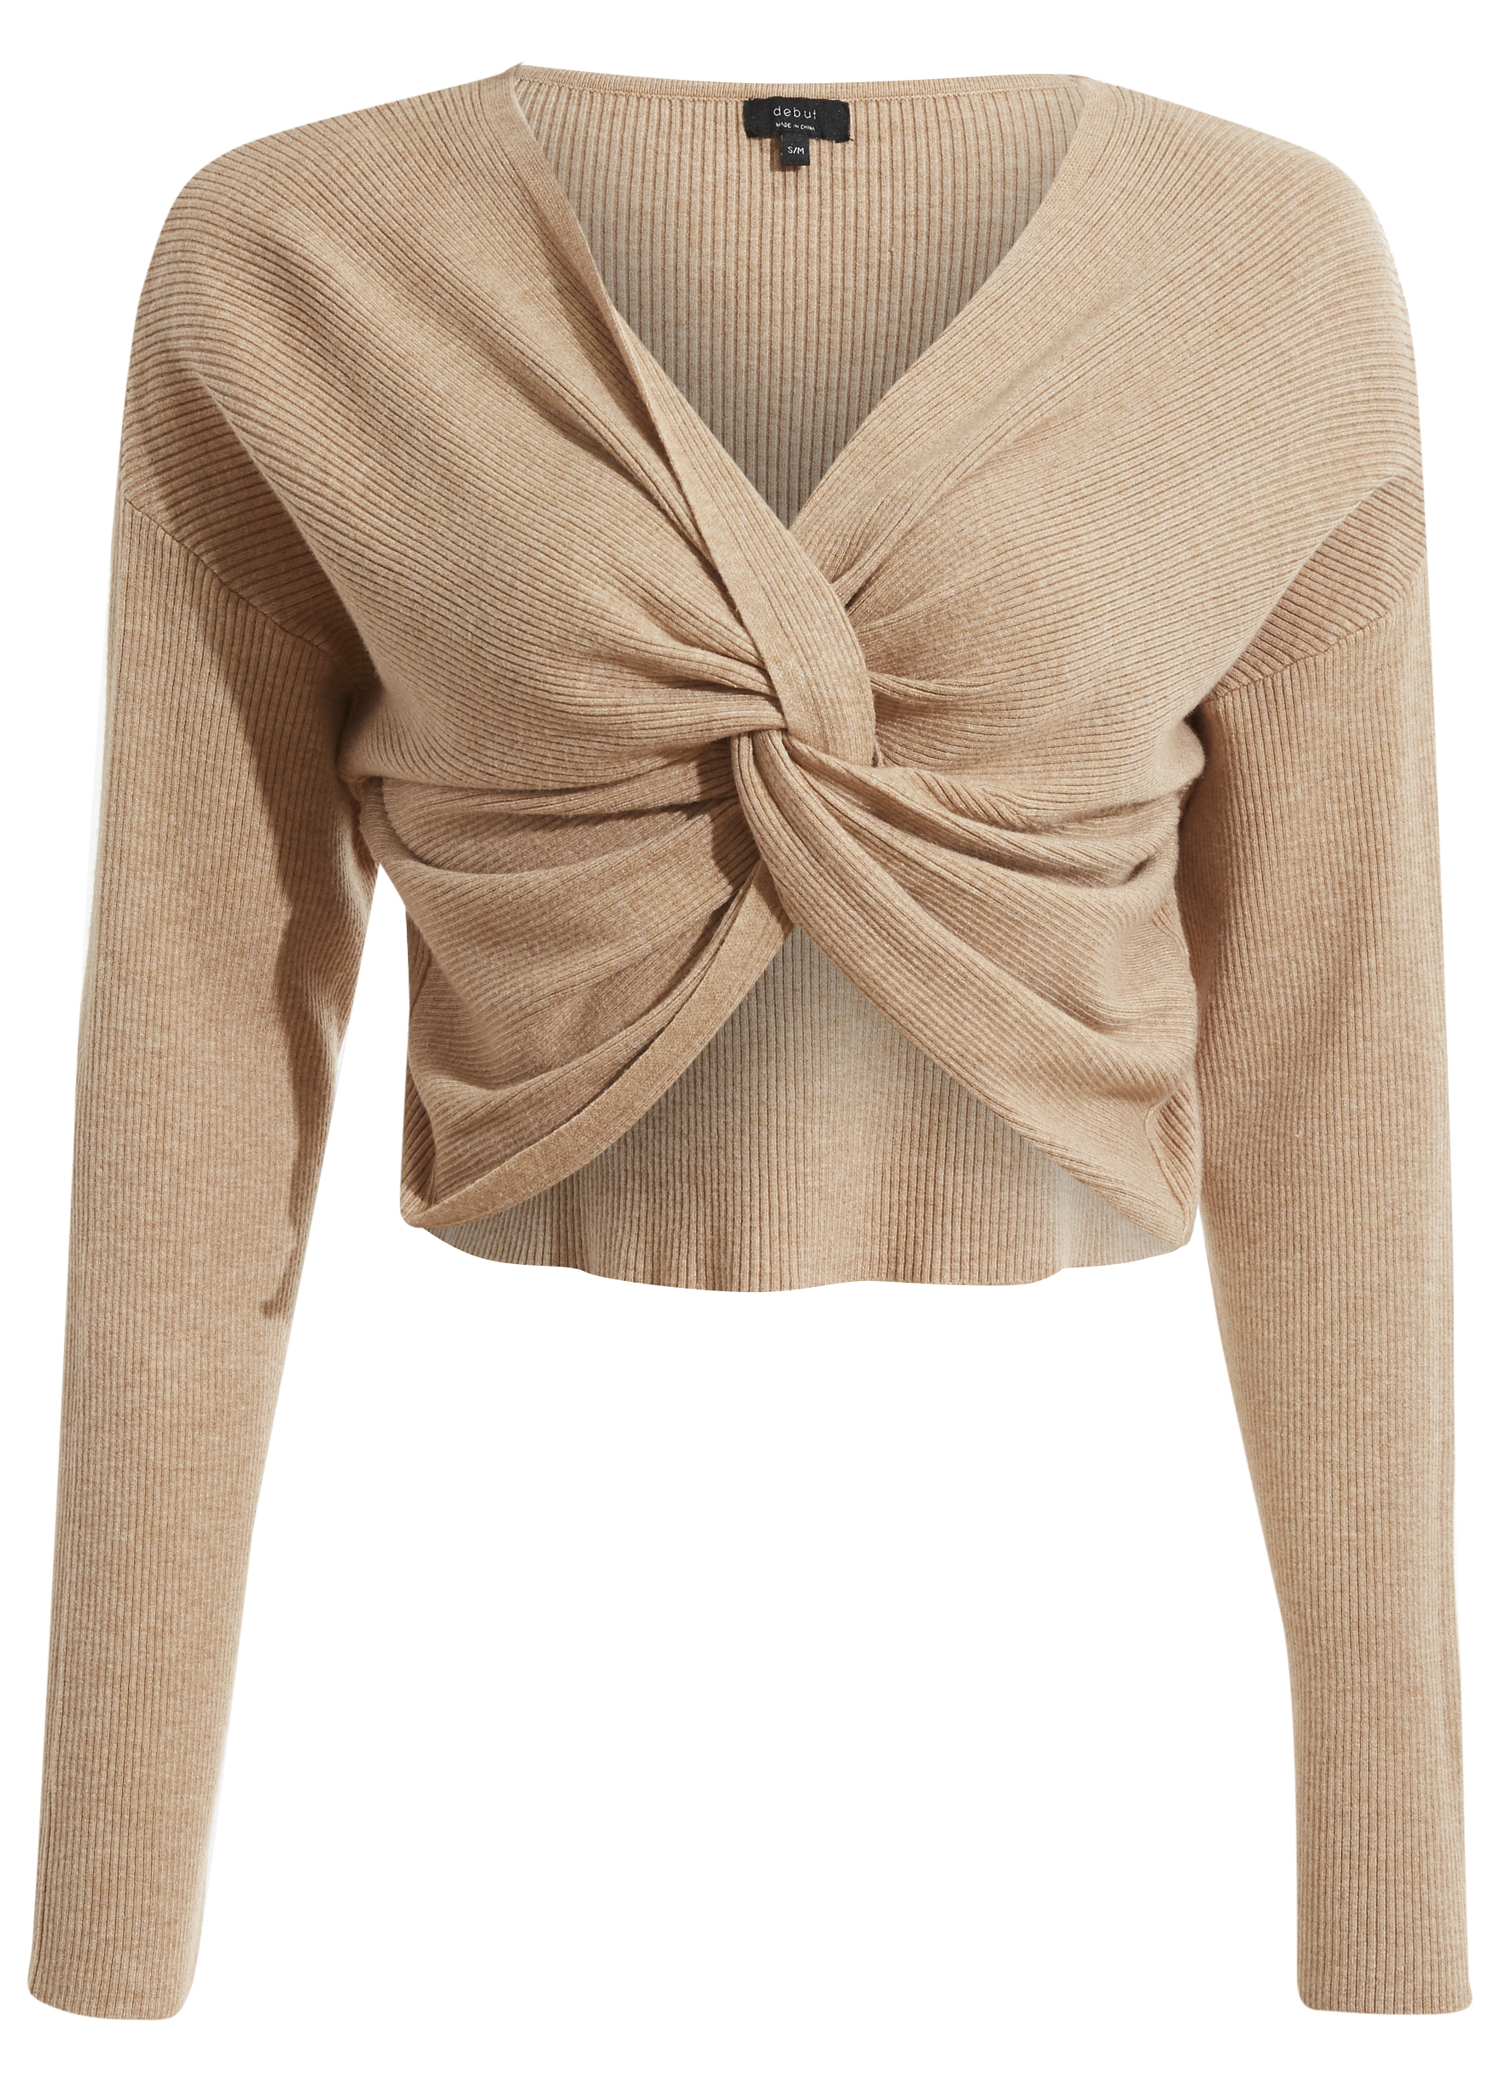 Front Knot Long Sleeve Knit Top in Camel S/M - M/L | DAILYLOOK